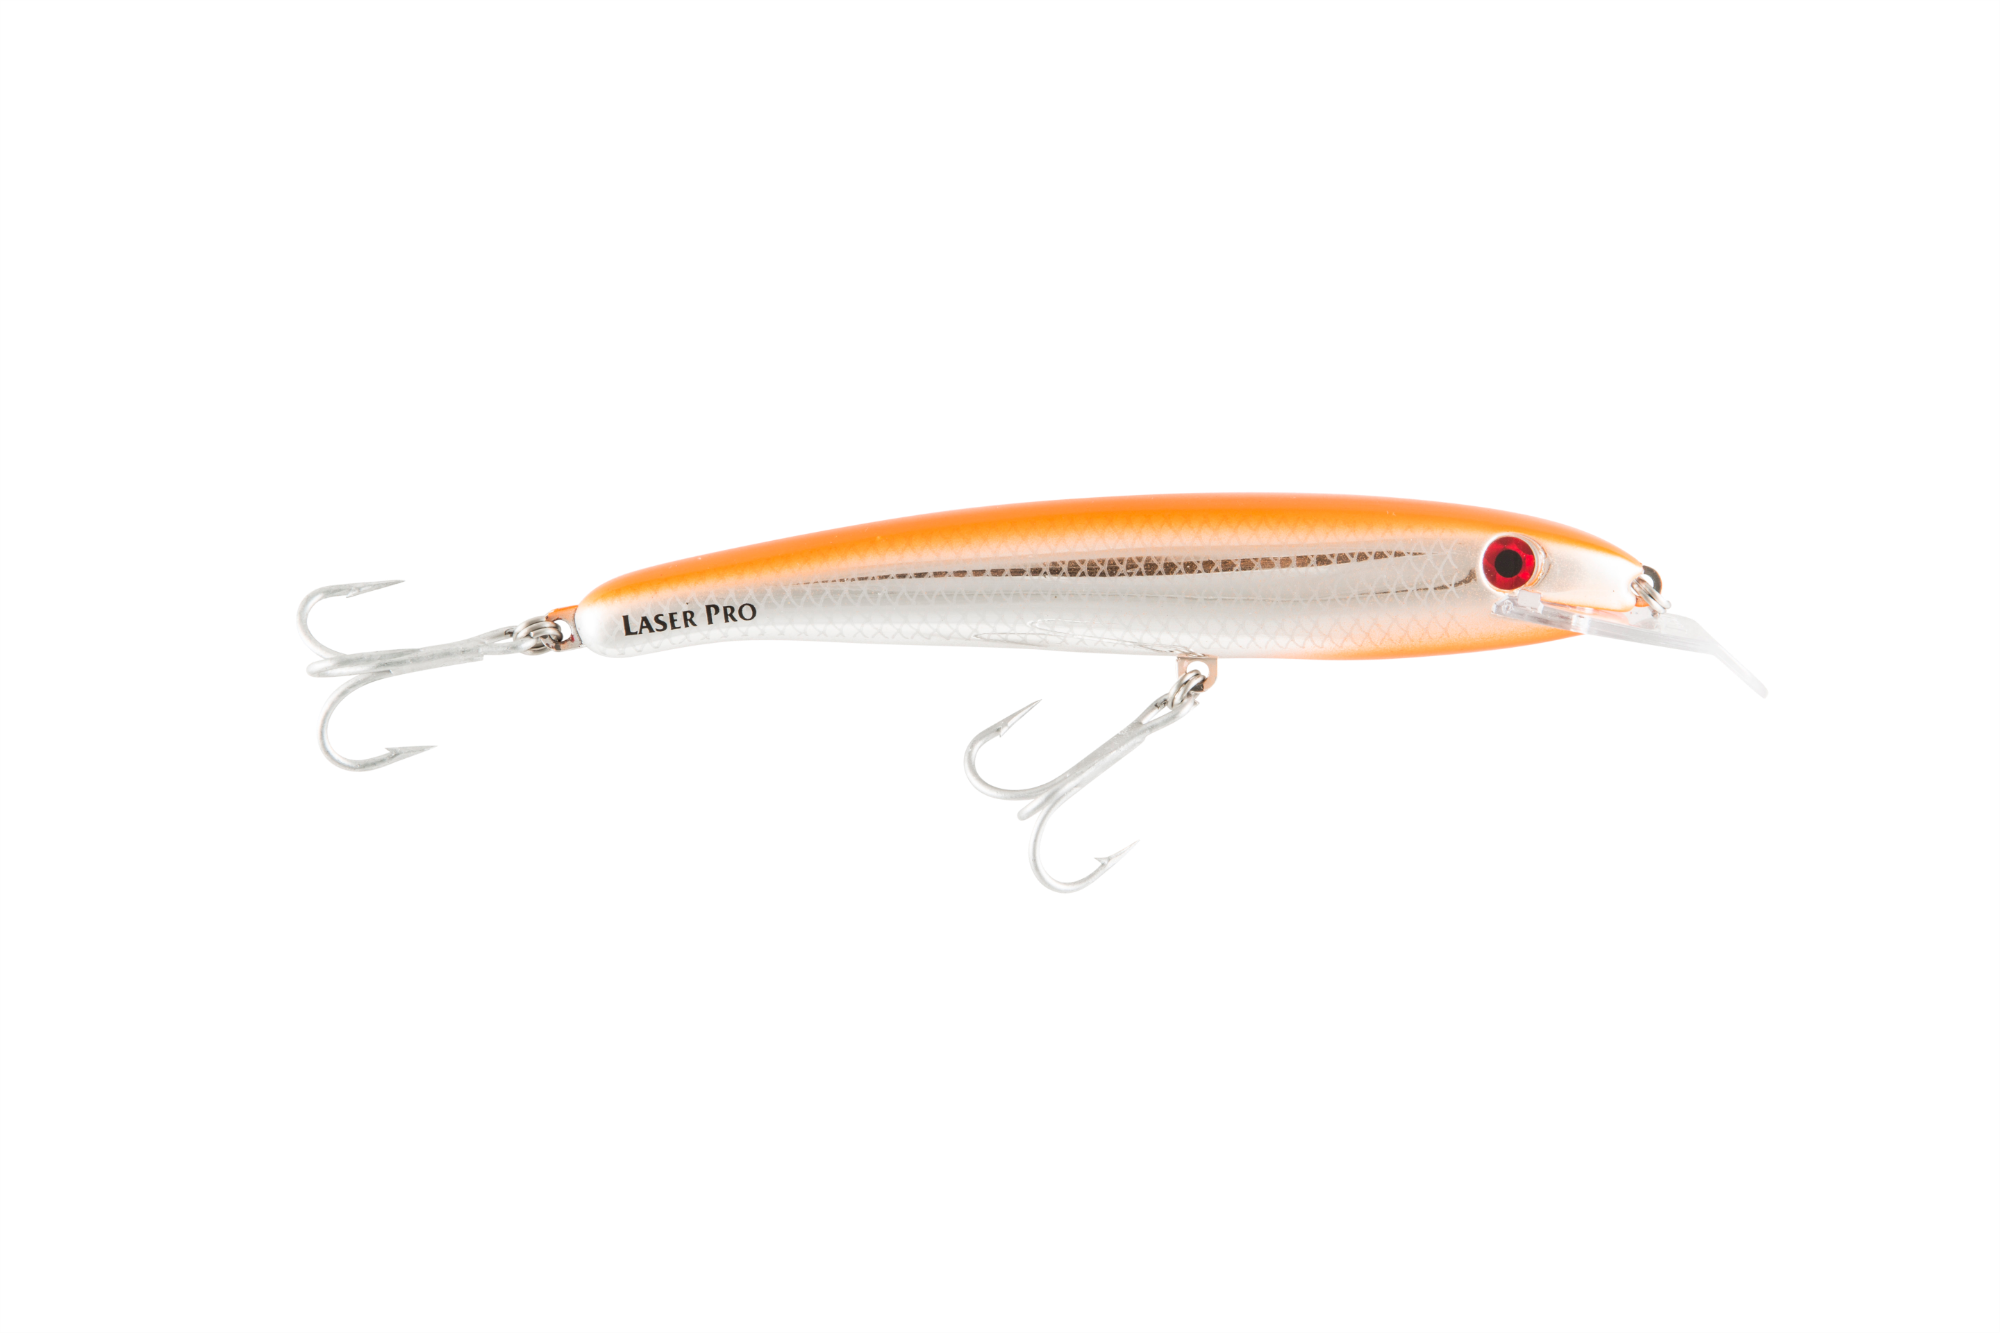 Halco Laser Pro 160 and 190 Lures For Sale in Perth, Western Australia